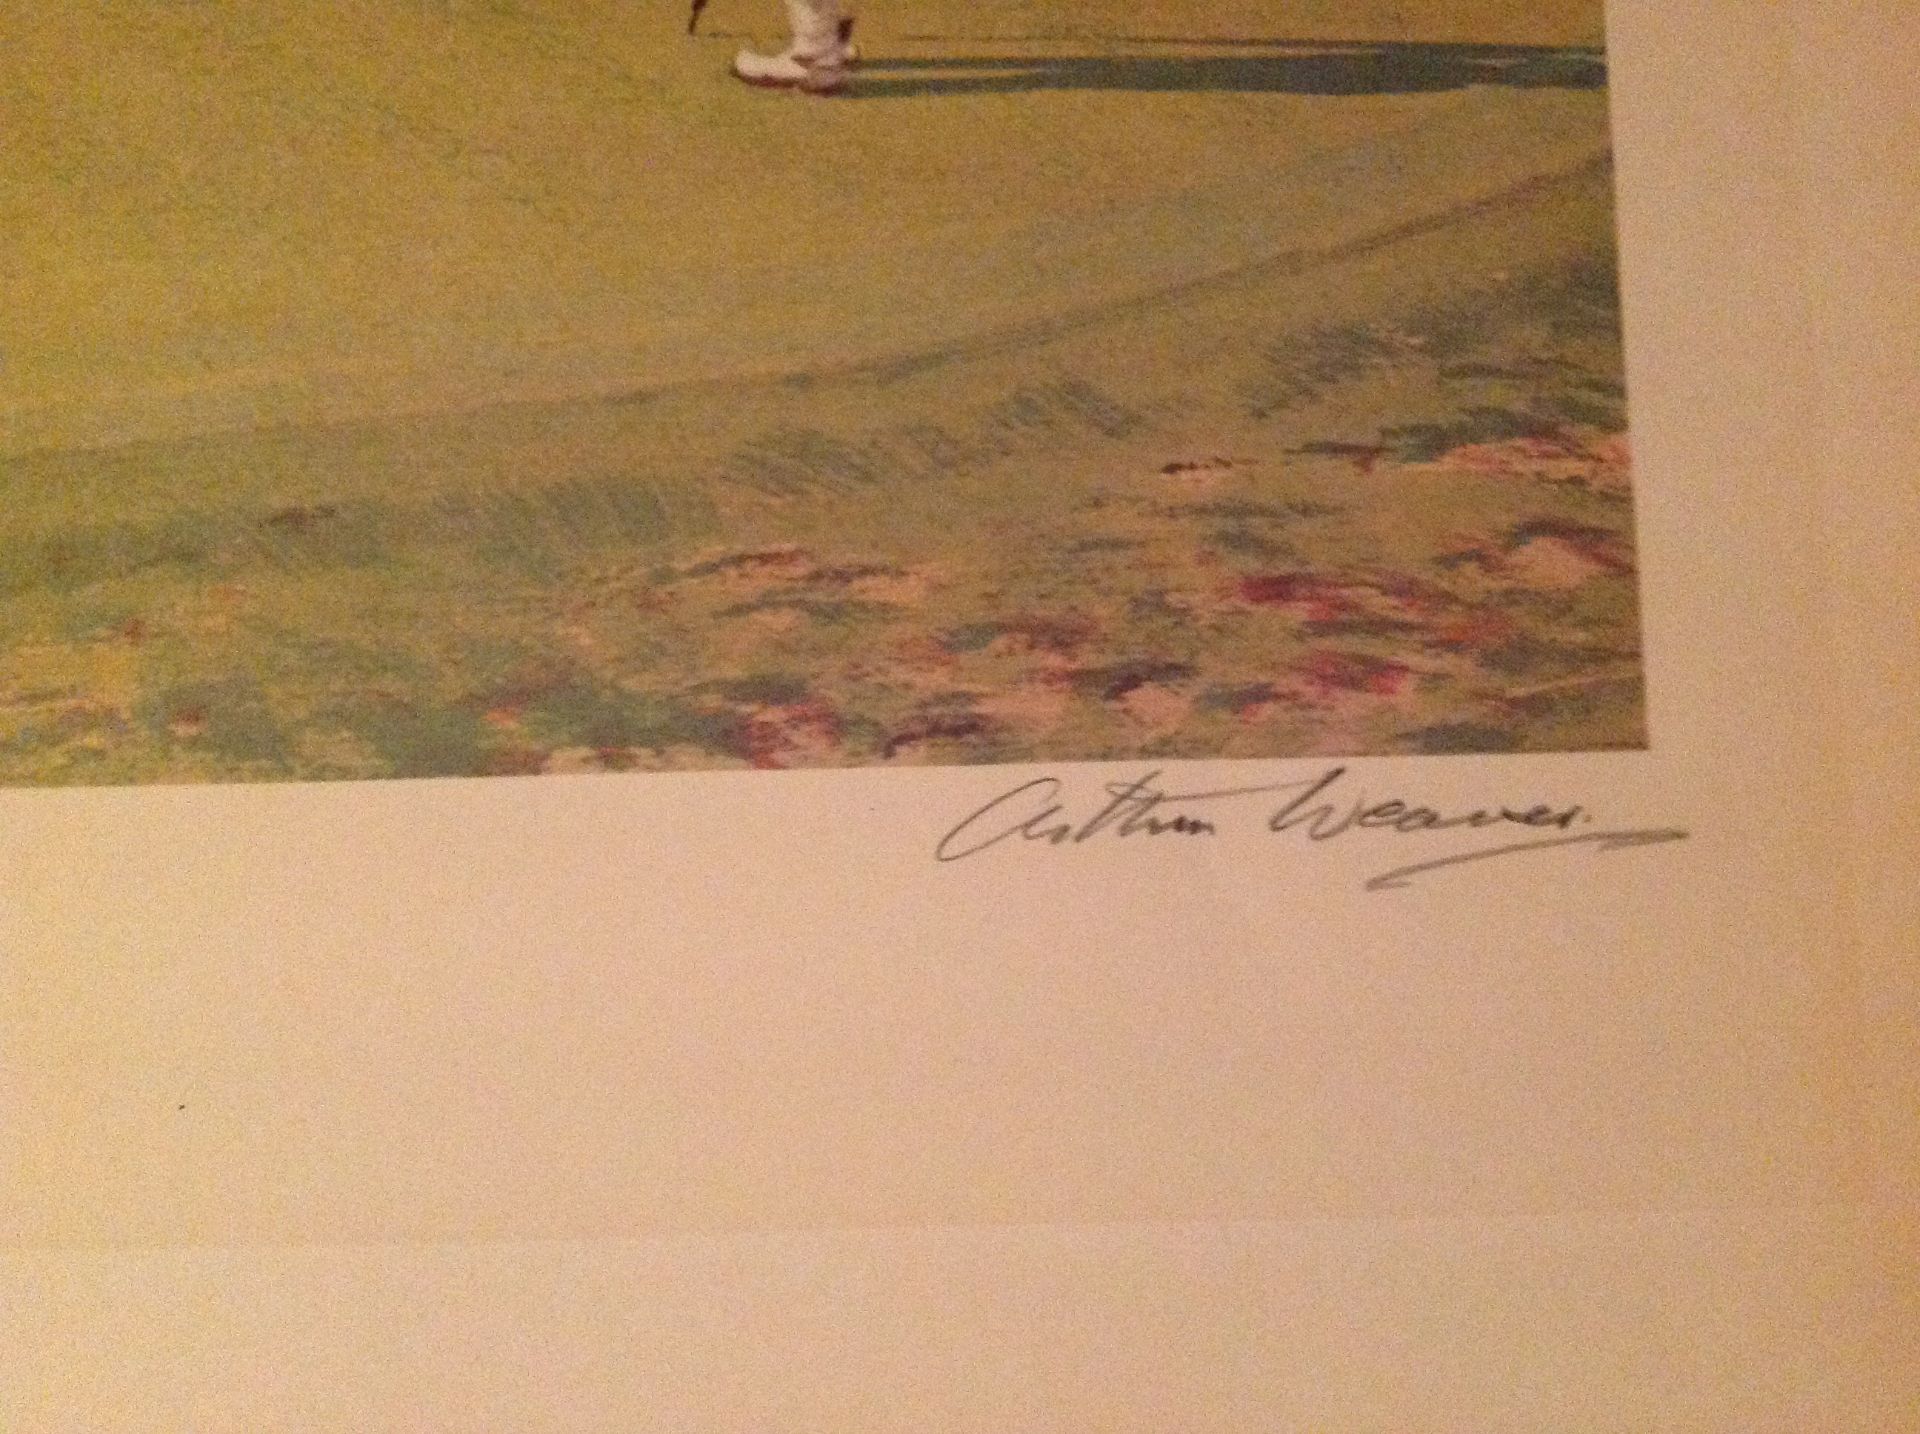 Arthur Weaver Signed print The Masters 1968 “Bob Goalby makes the final putt to win” - Image 3 of 4